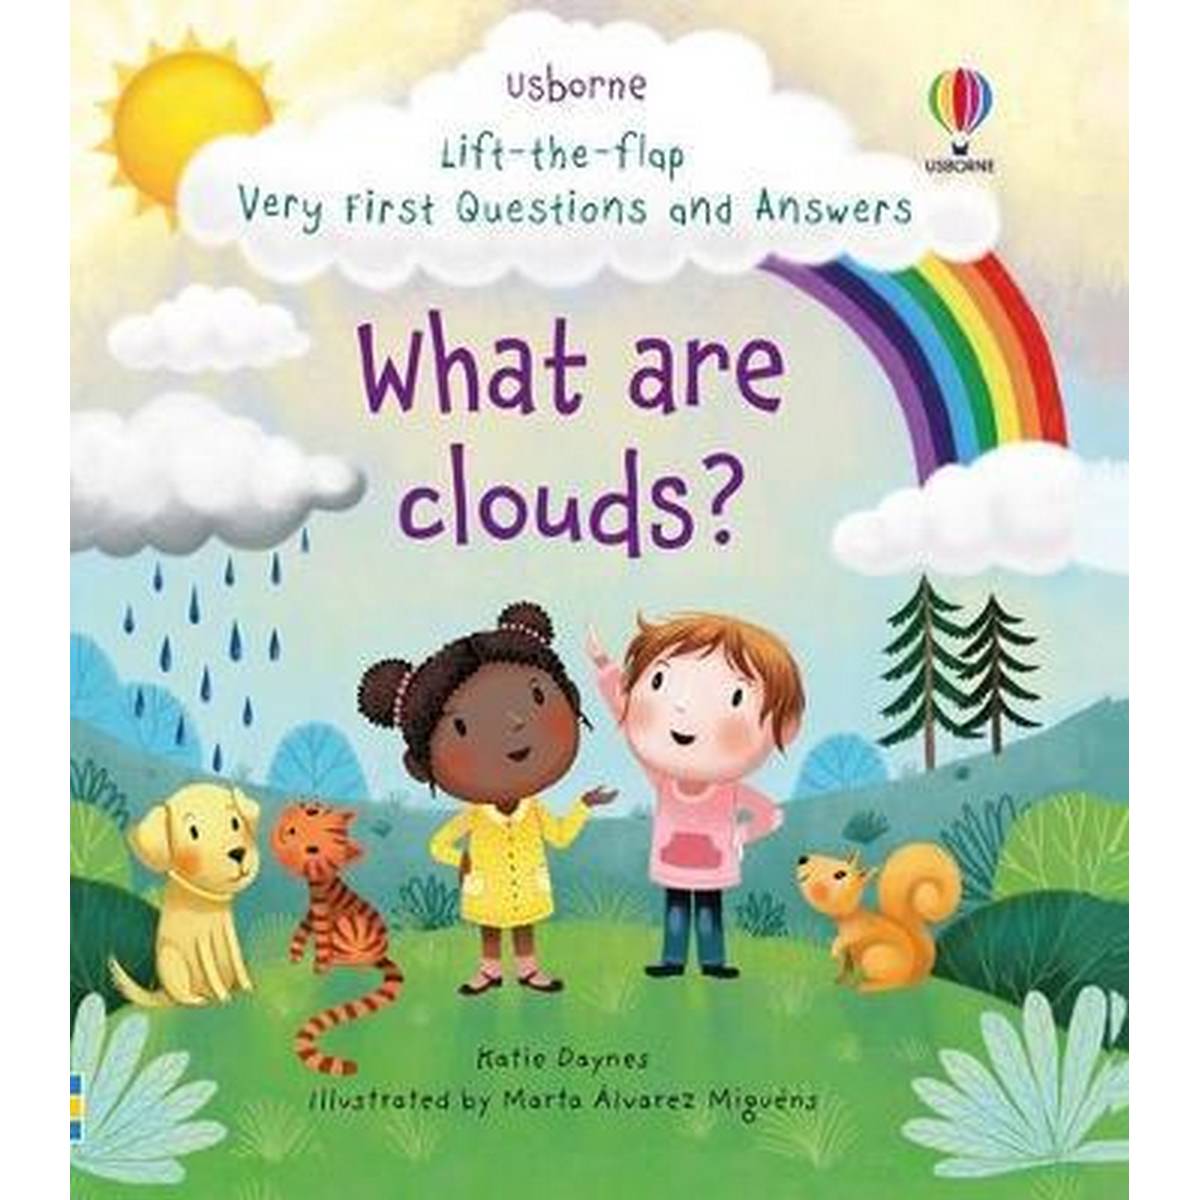 Very First Questions and Answers What are clouds